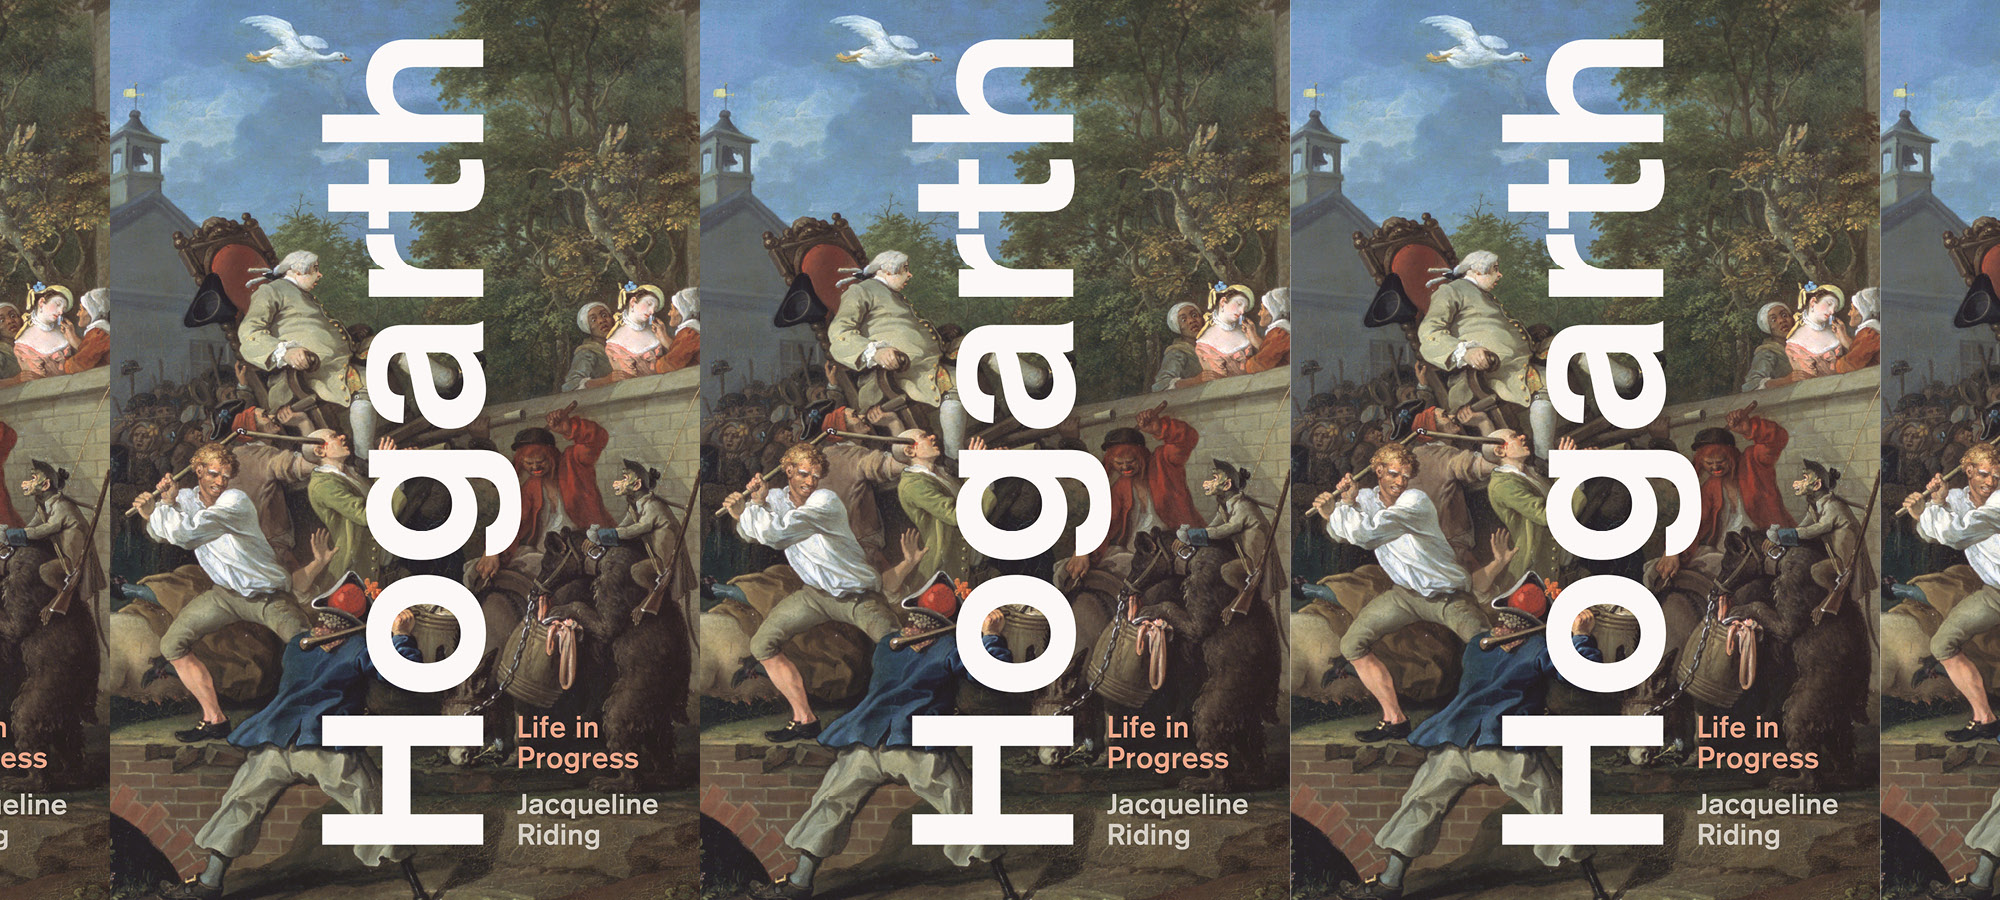 Author Jacqueline Riding on her book ‘Hogarth: Life in Progress’ – Chiswick Book Festival